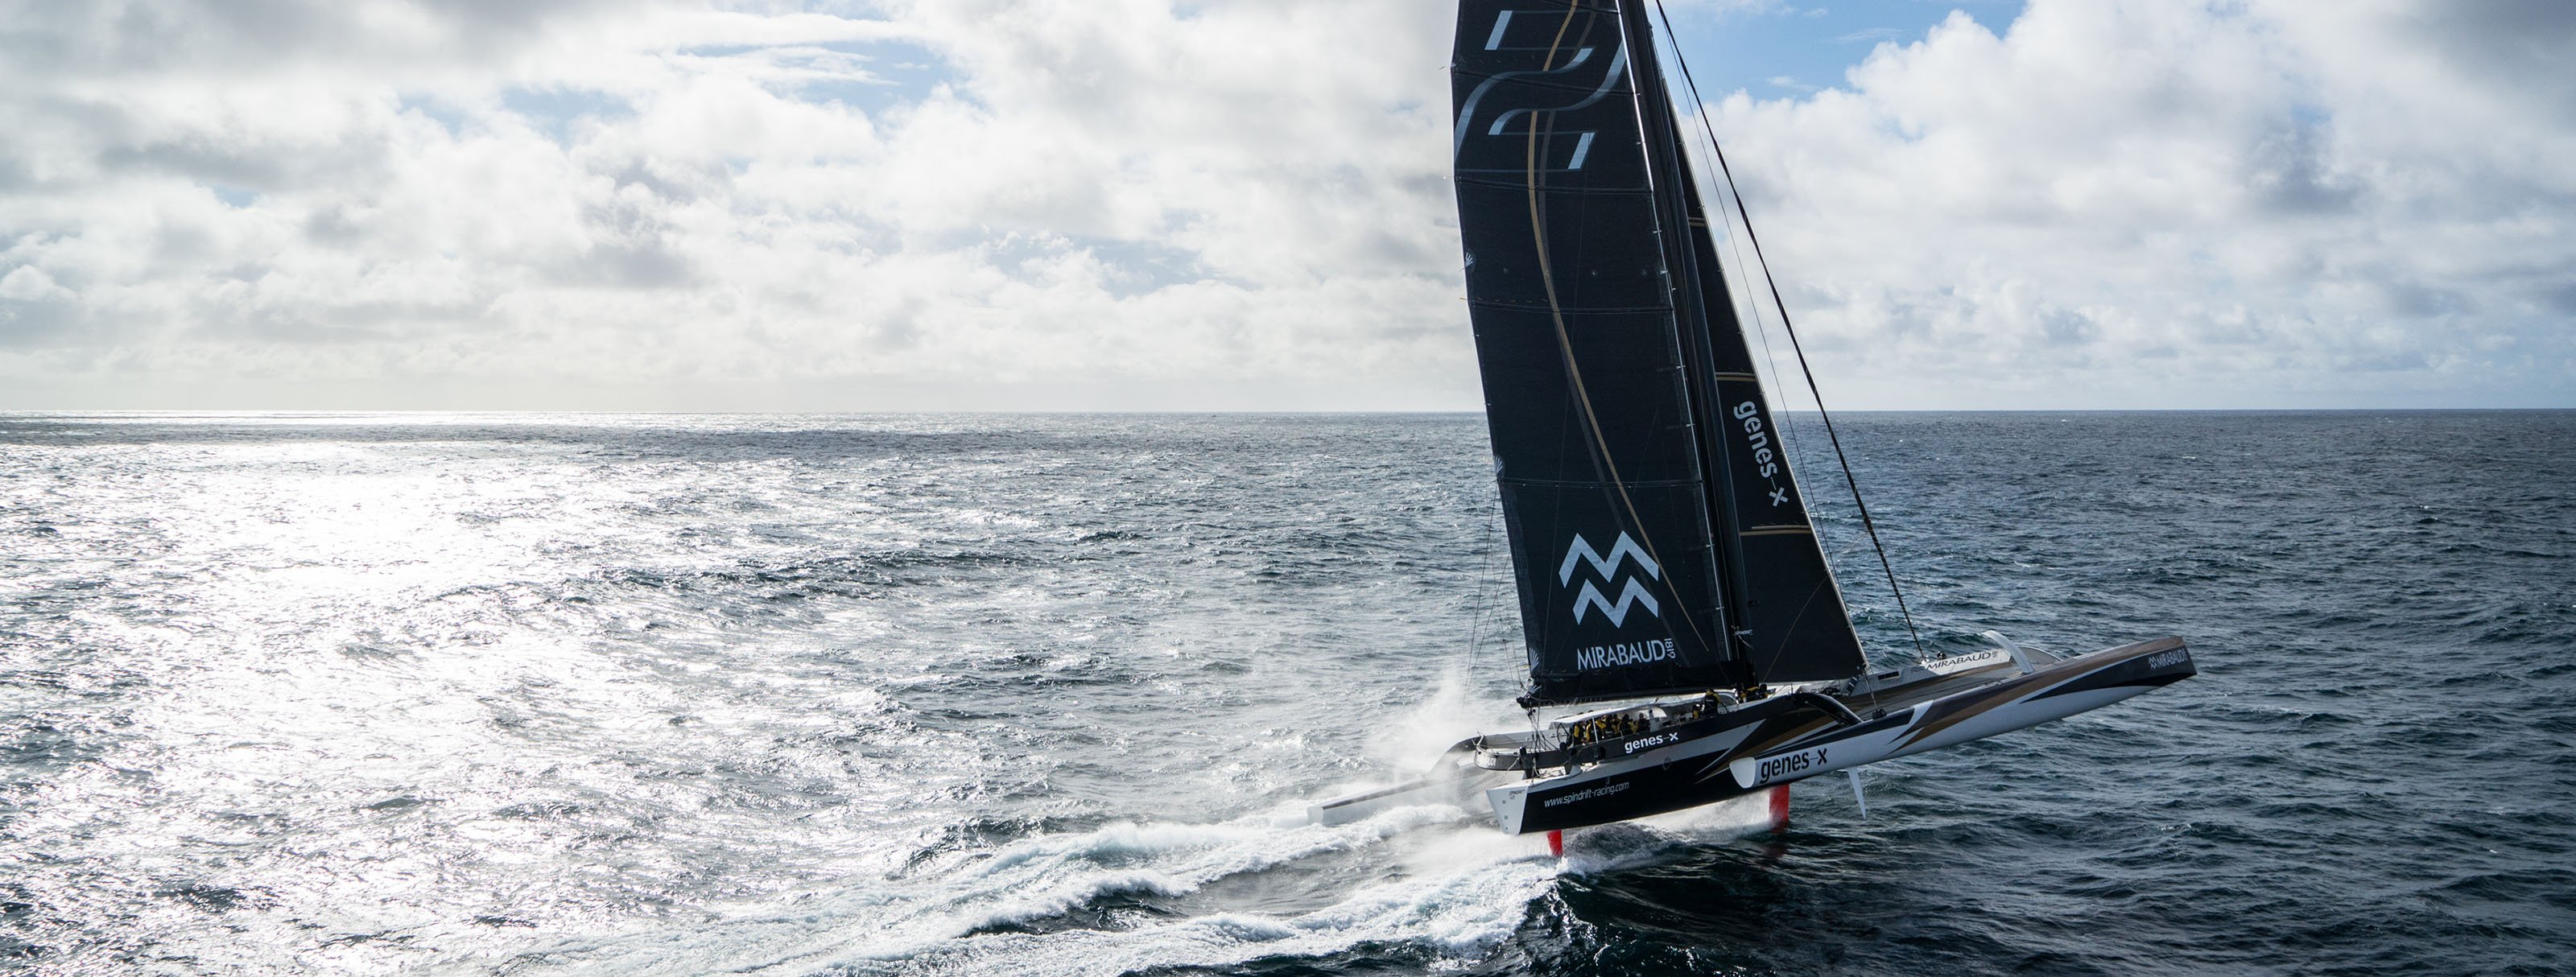  Around the World Record  Trophee Jules Verne  'Spindrift'  Day 7